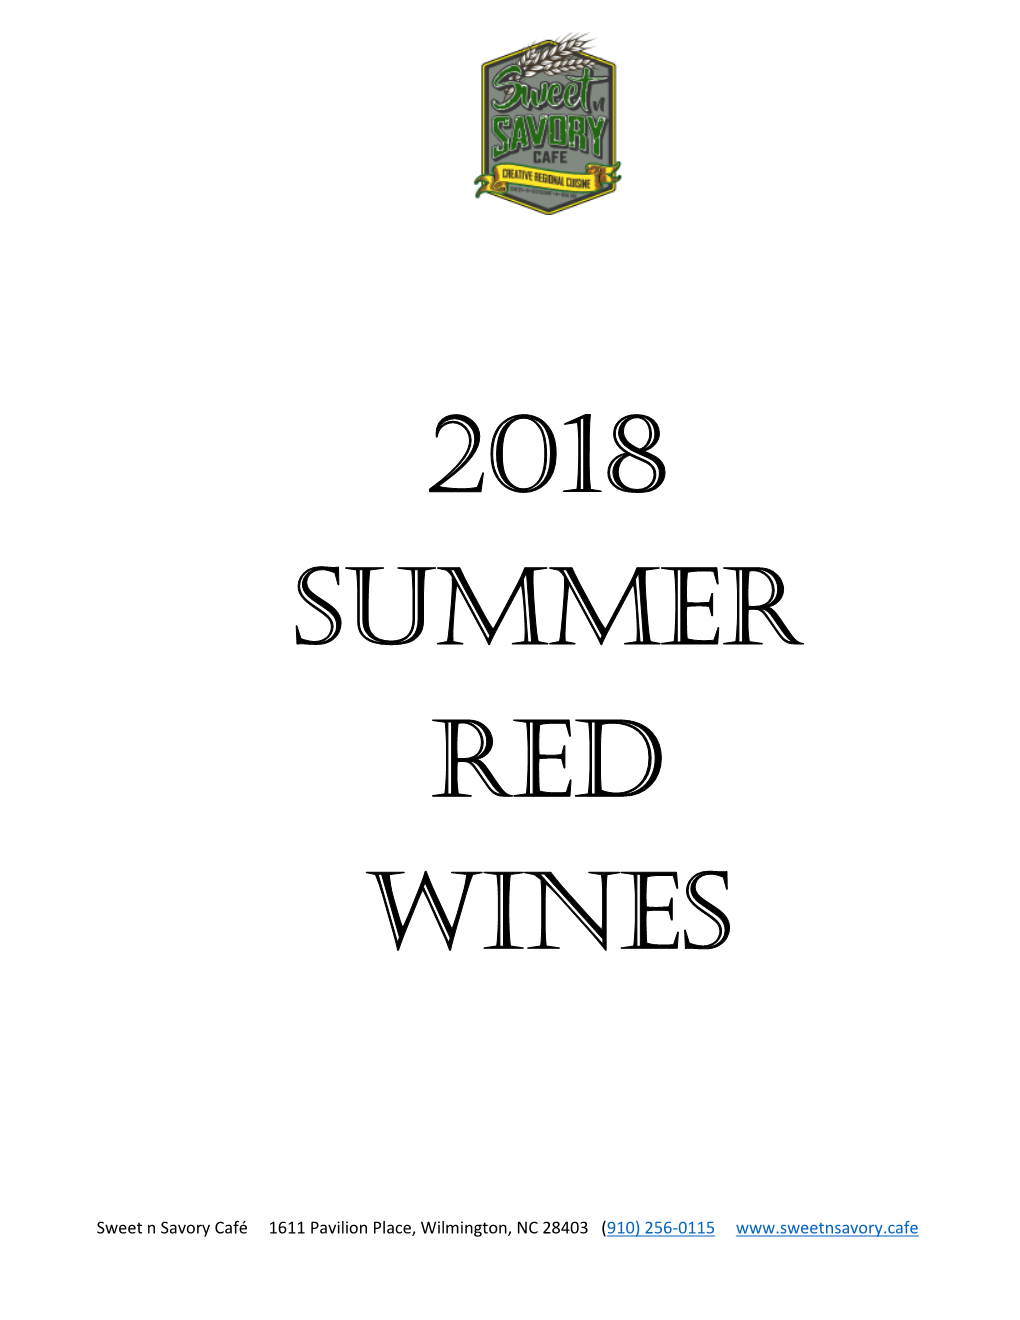 2018 SUMMER Red Wines